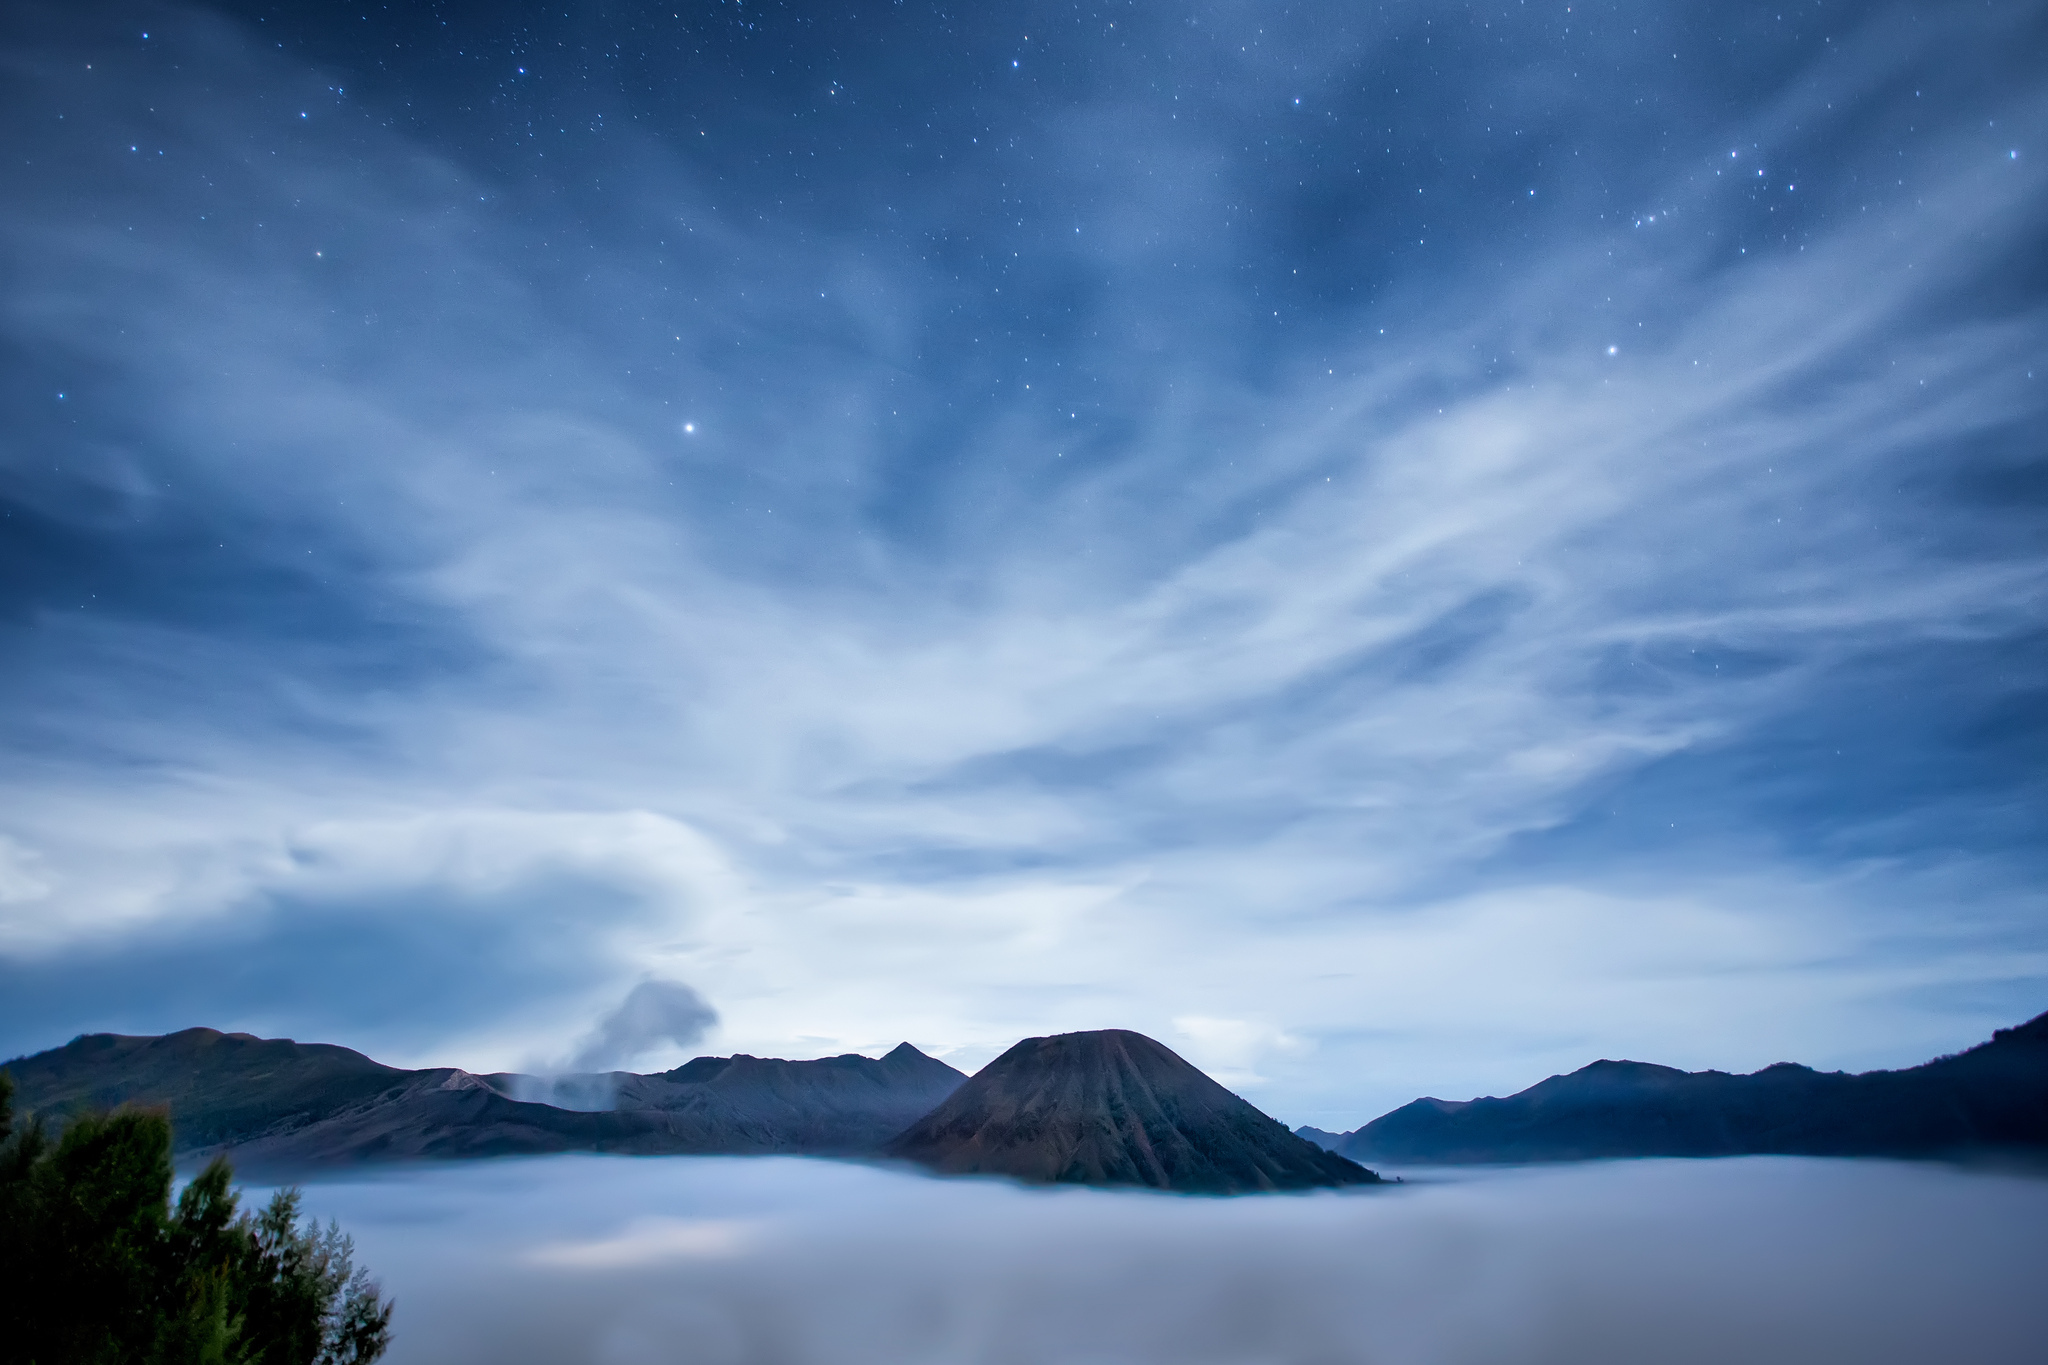 indonesia, Java, Island, Sea, Volcano, Night, Sky, Clouds, Stars, Mountains, Landscapes Wallpaper